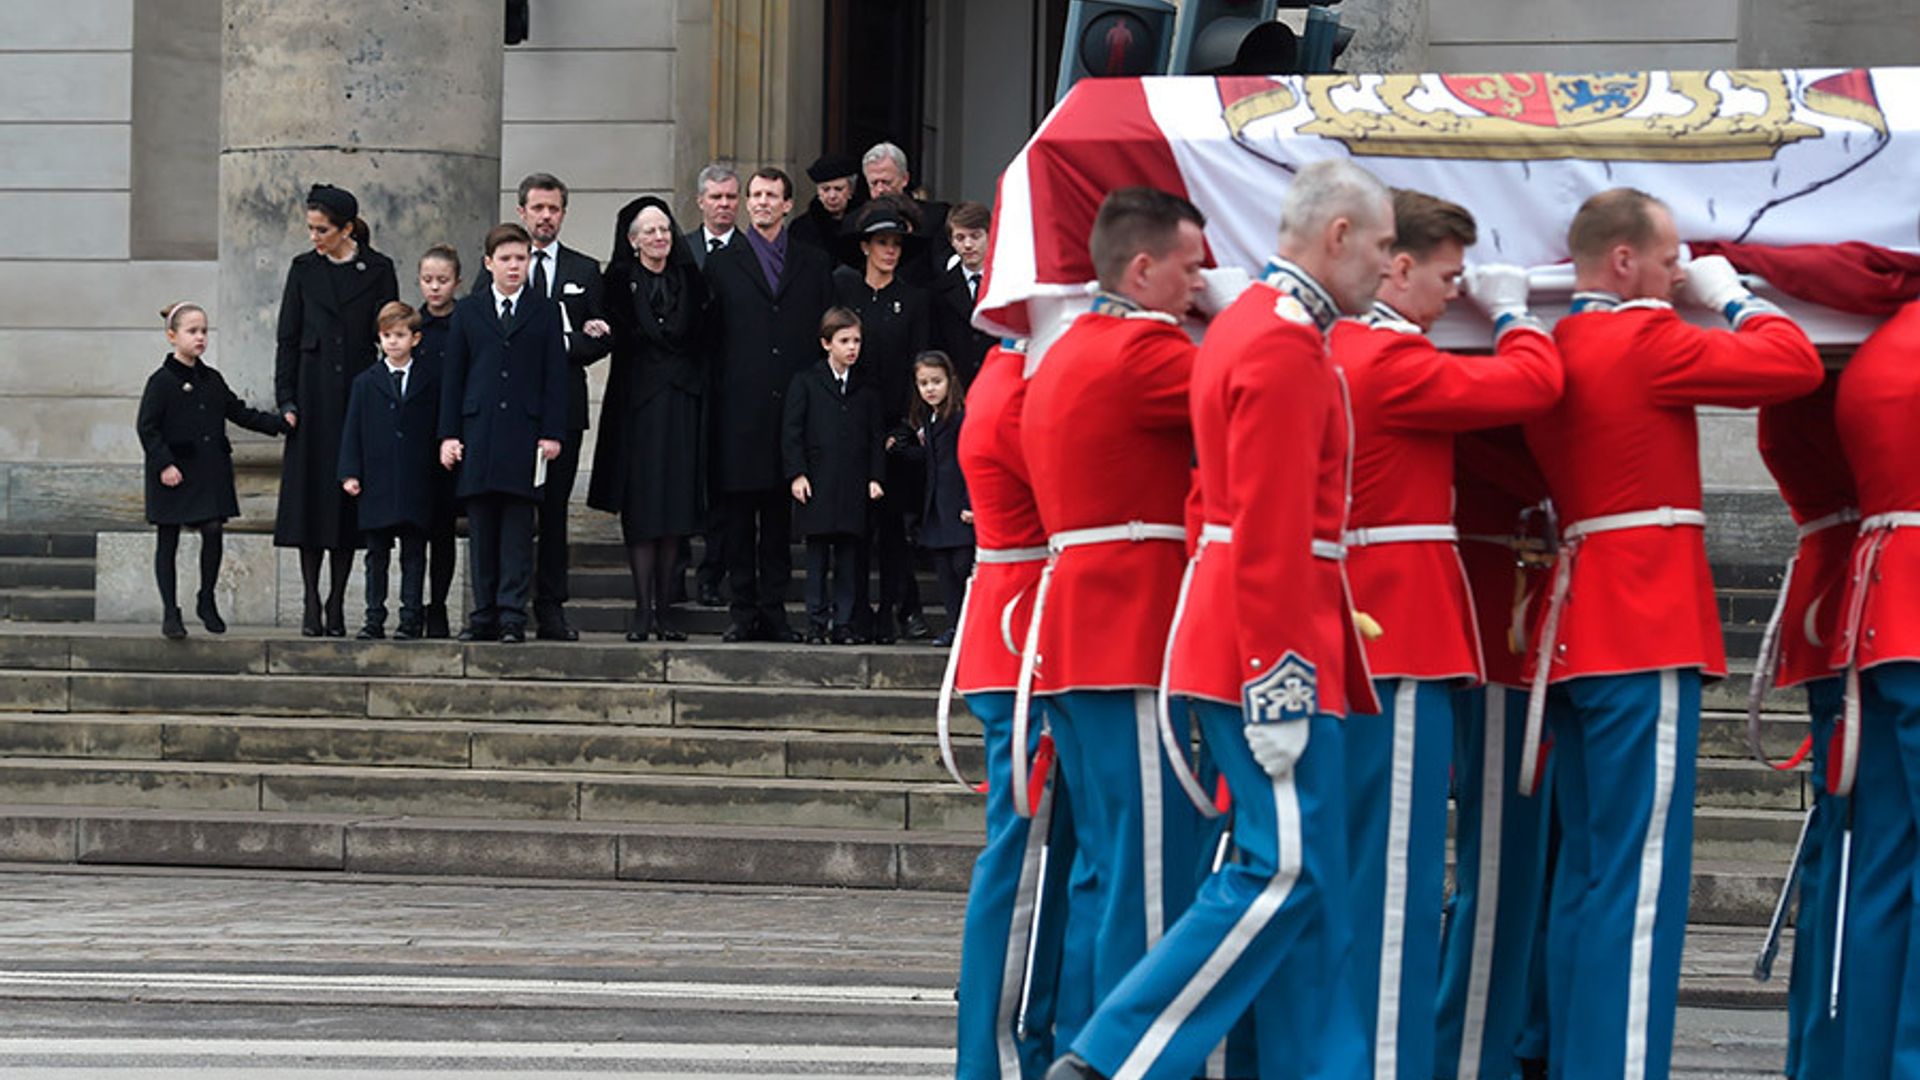 Prince Henrik funeral: The Danish royal family joins Queen Margrethe in mourning